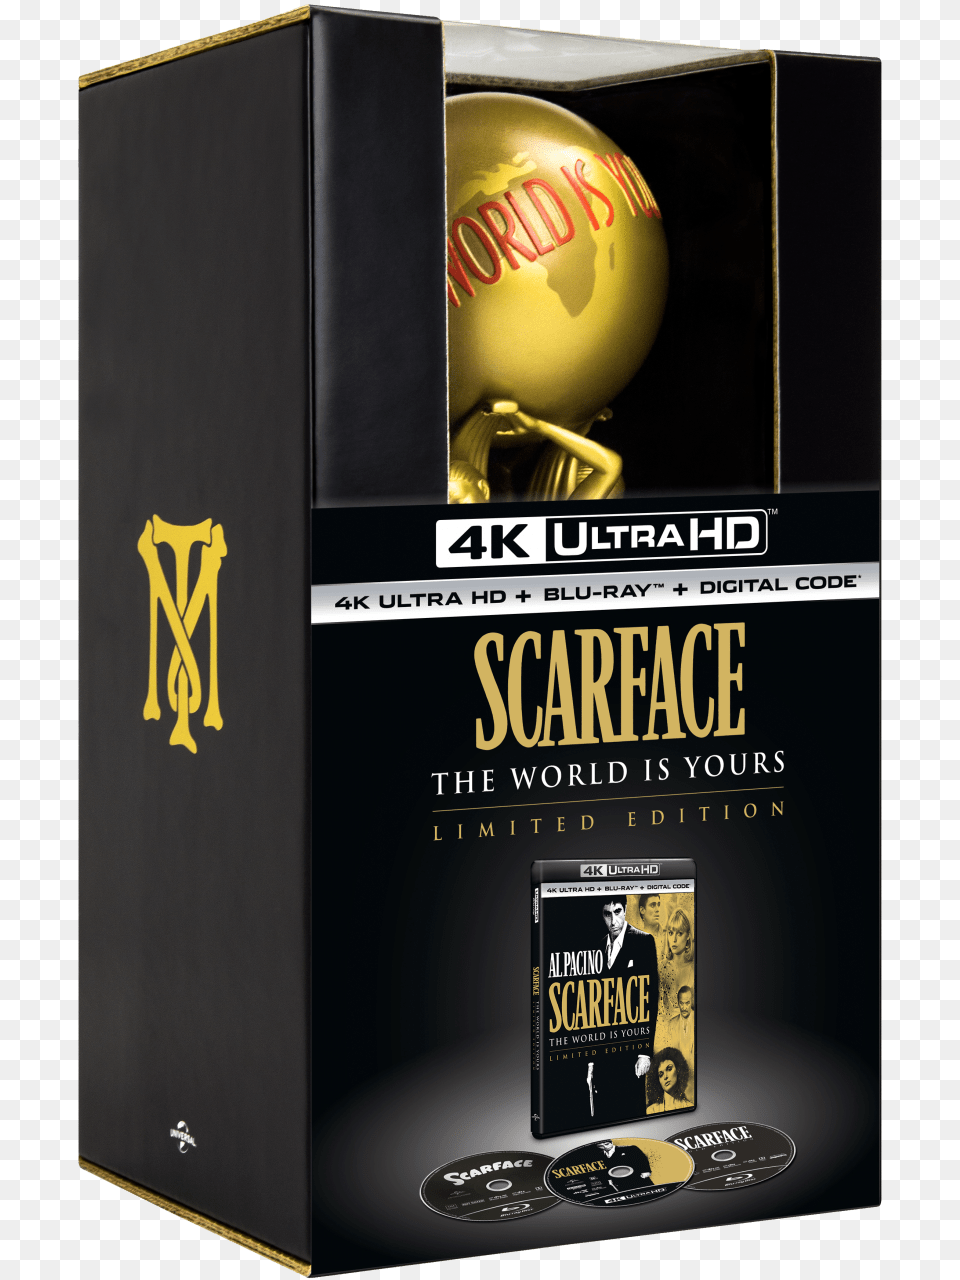 Scarface The World Is Yours 4k Ultra Hd Gift Set Scarface 4k Limited Edition, Person, Face, Head, Sphere Png Image